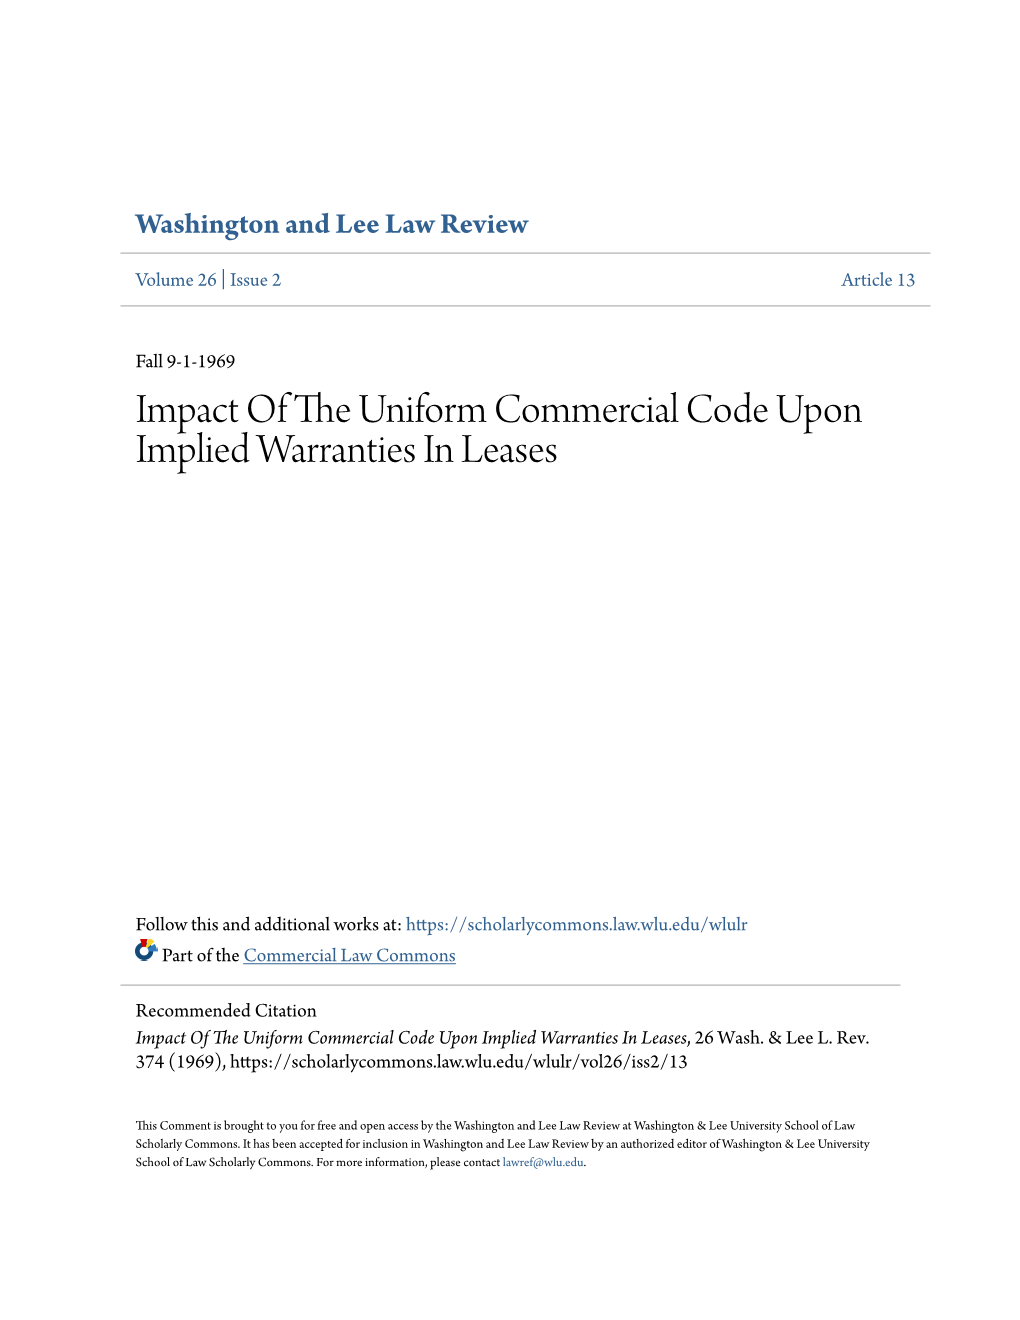 Impact of the Uniform Commercial Code Upon Implied Warranties in Leases, 26 Wash